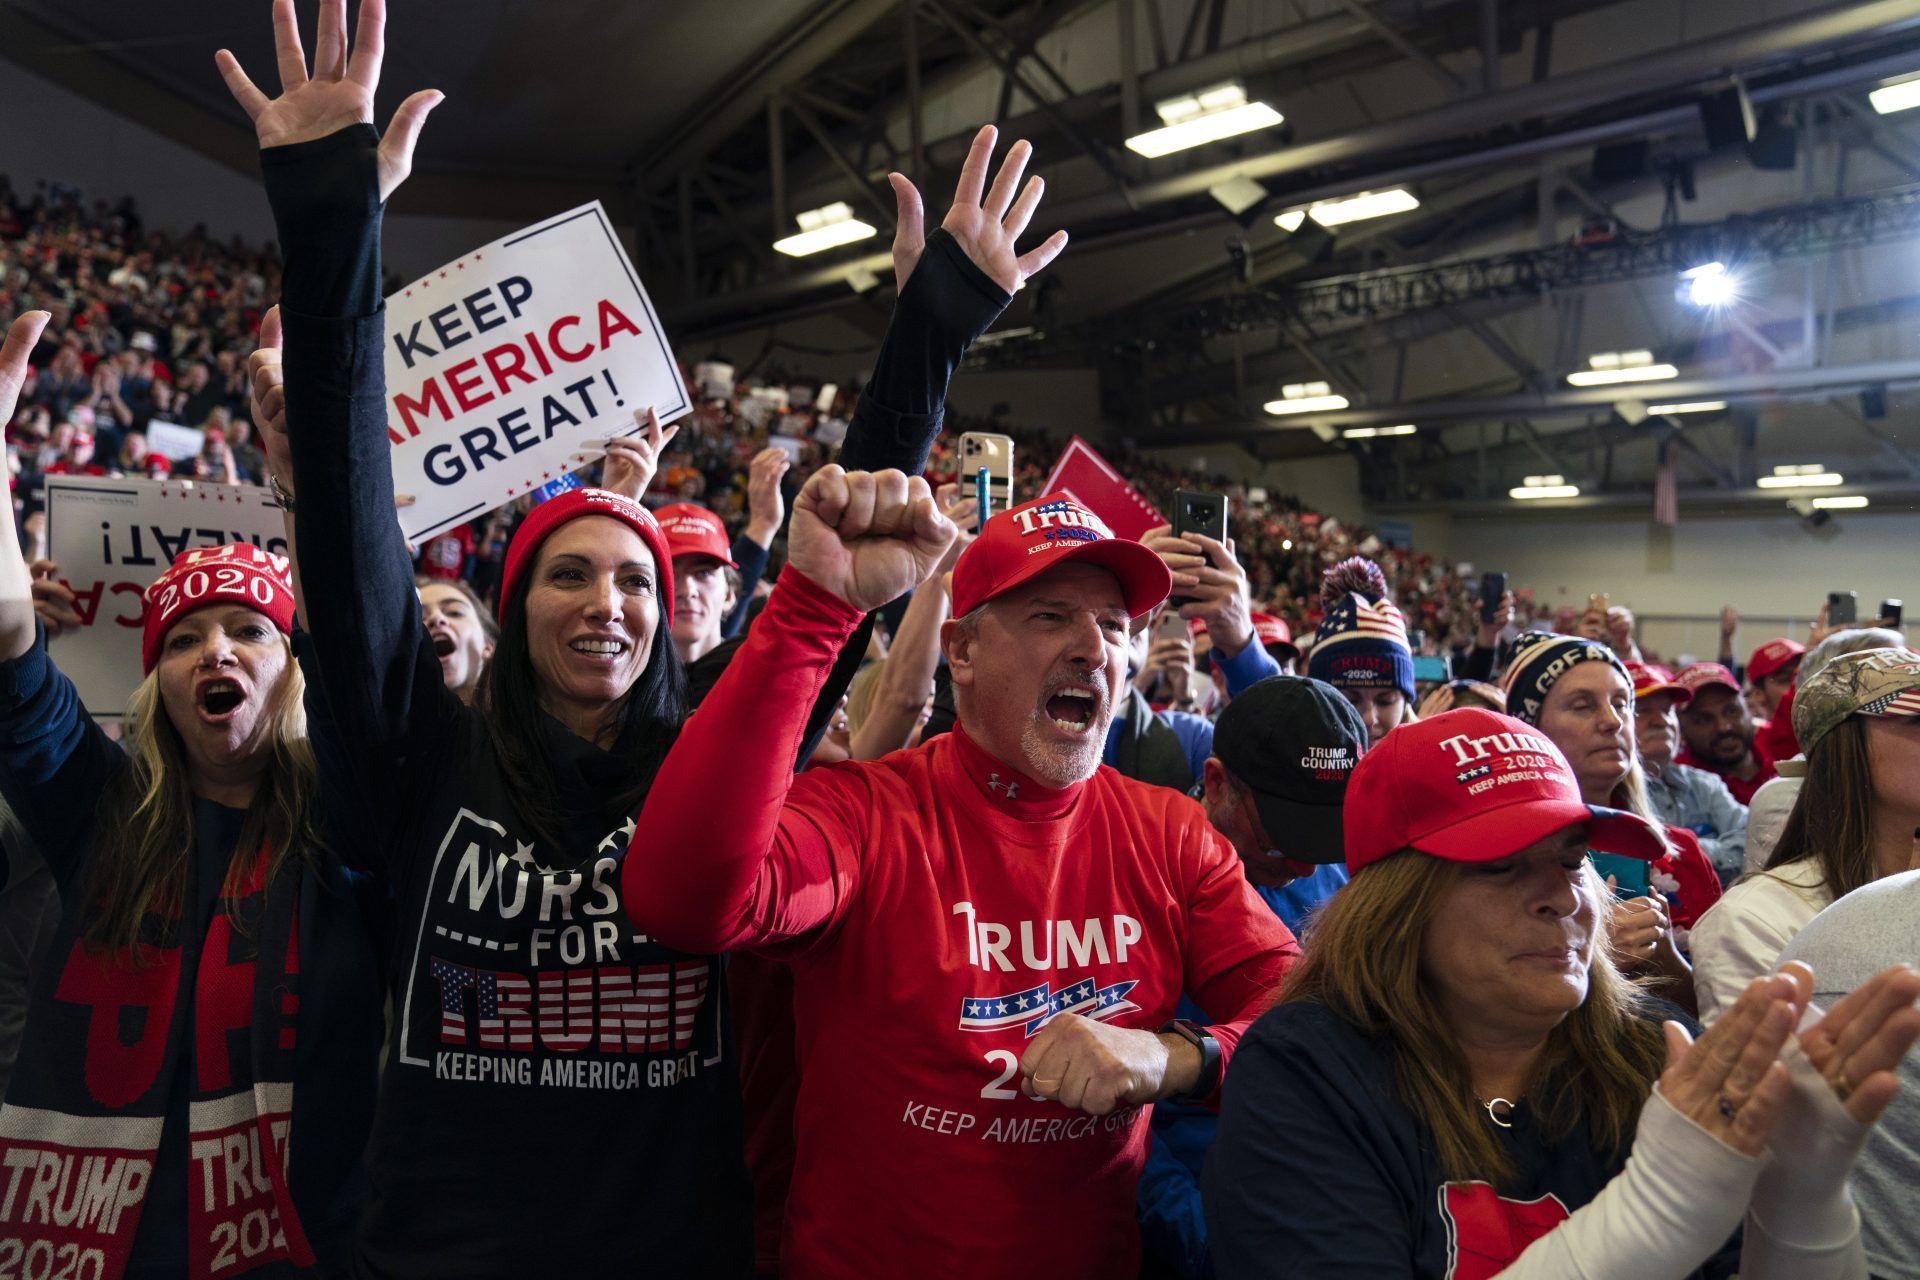 Supporters of President Donald Trump cheer as he speaks at a campaign rally at the Wildwoods Convention Center Oceanfront, Tuesday, Jan. 28, 2020, in Wildwood, N.J.